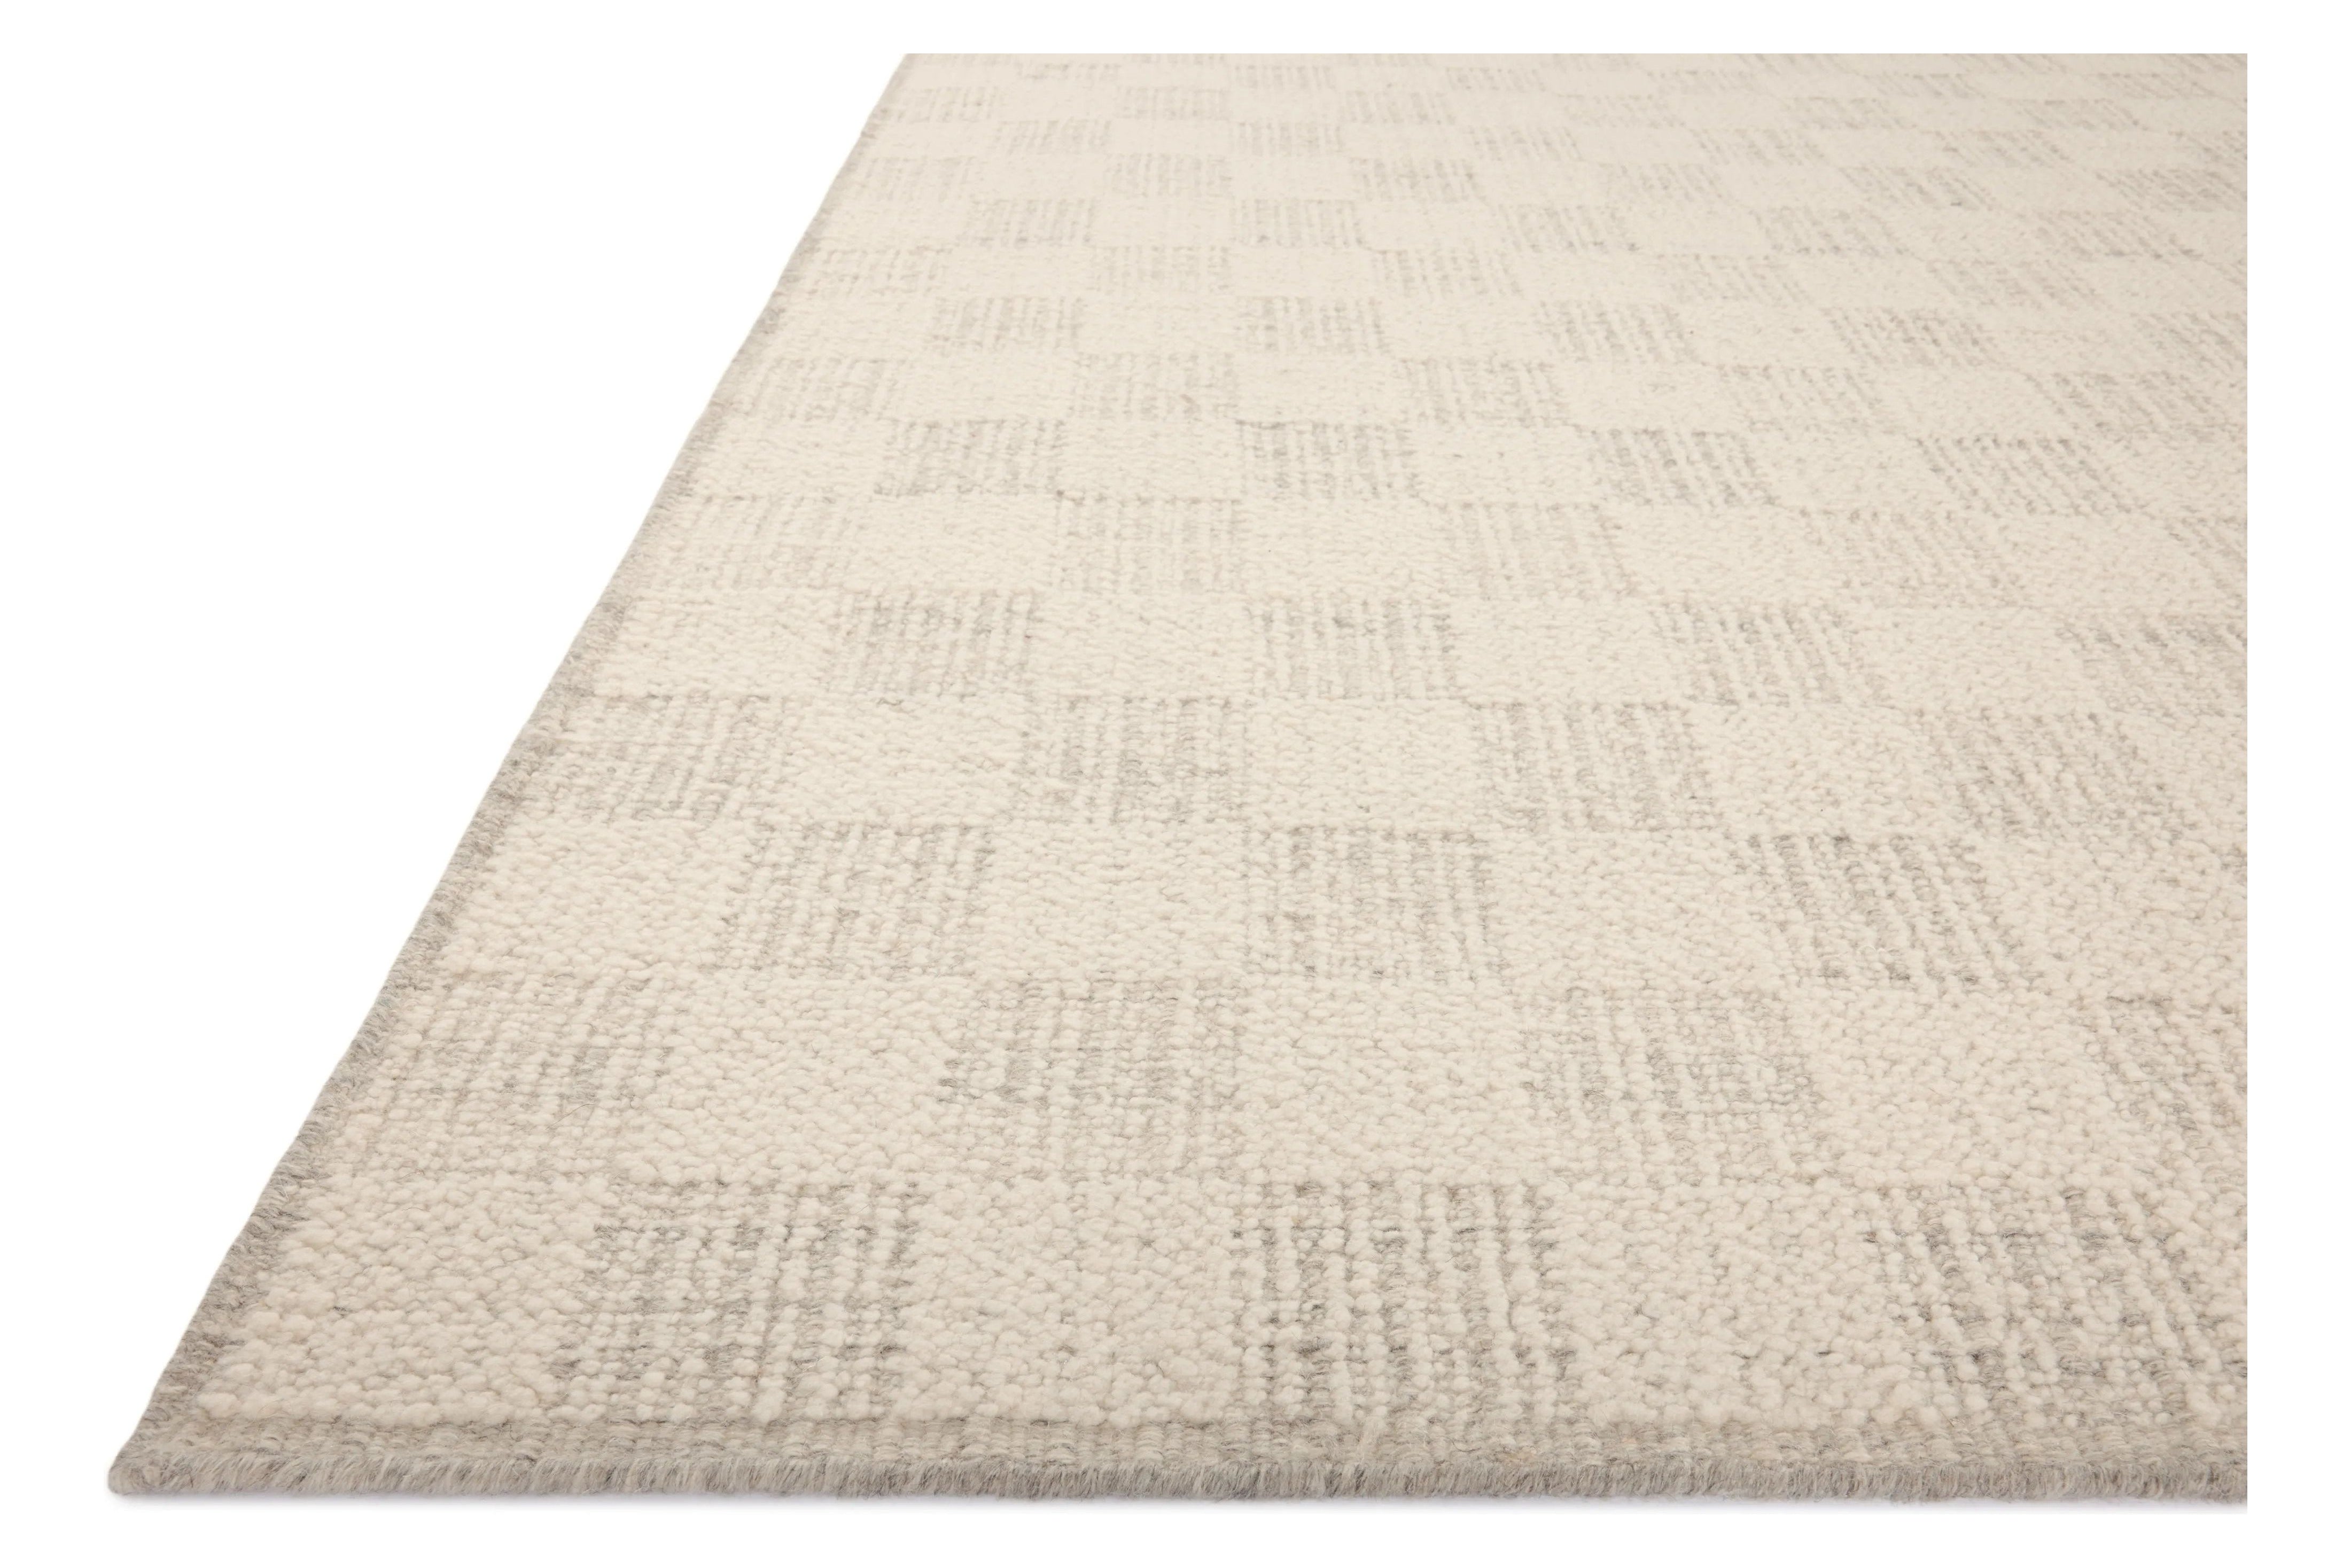 The Knox Ivory / Silver Rug by Brigette Romanek x Loloi is a handwoven area rug with a contemporary checkerboard pattern and a texture reminiscent of a luxurious knit sweater. Made of a blend of wool and cotton that plays with scale and texture, Knox is imbued with cozy luxury that can anchor any room. Amethyst Home provides interior design, new home construction design consulting, vintage area rugs, and lighting in the Portland metro area.